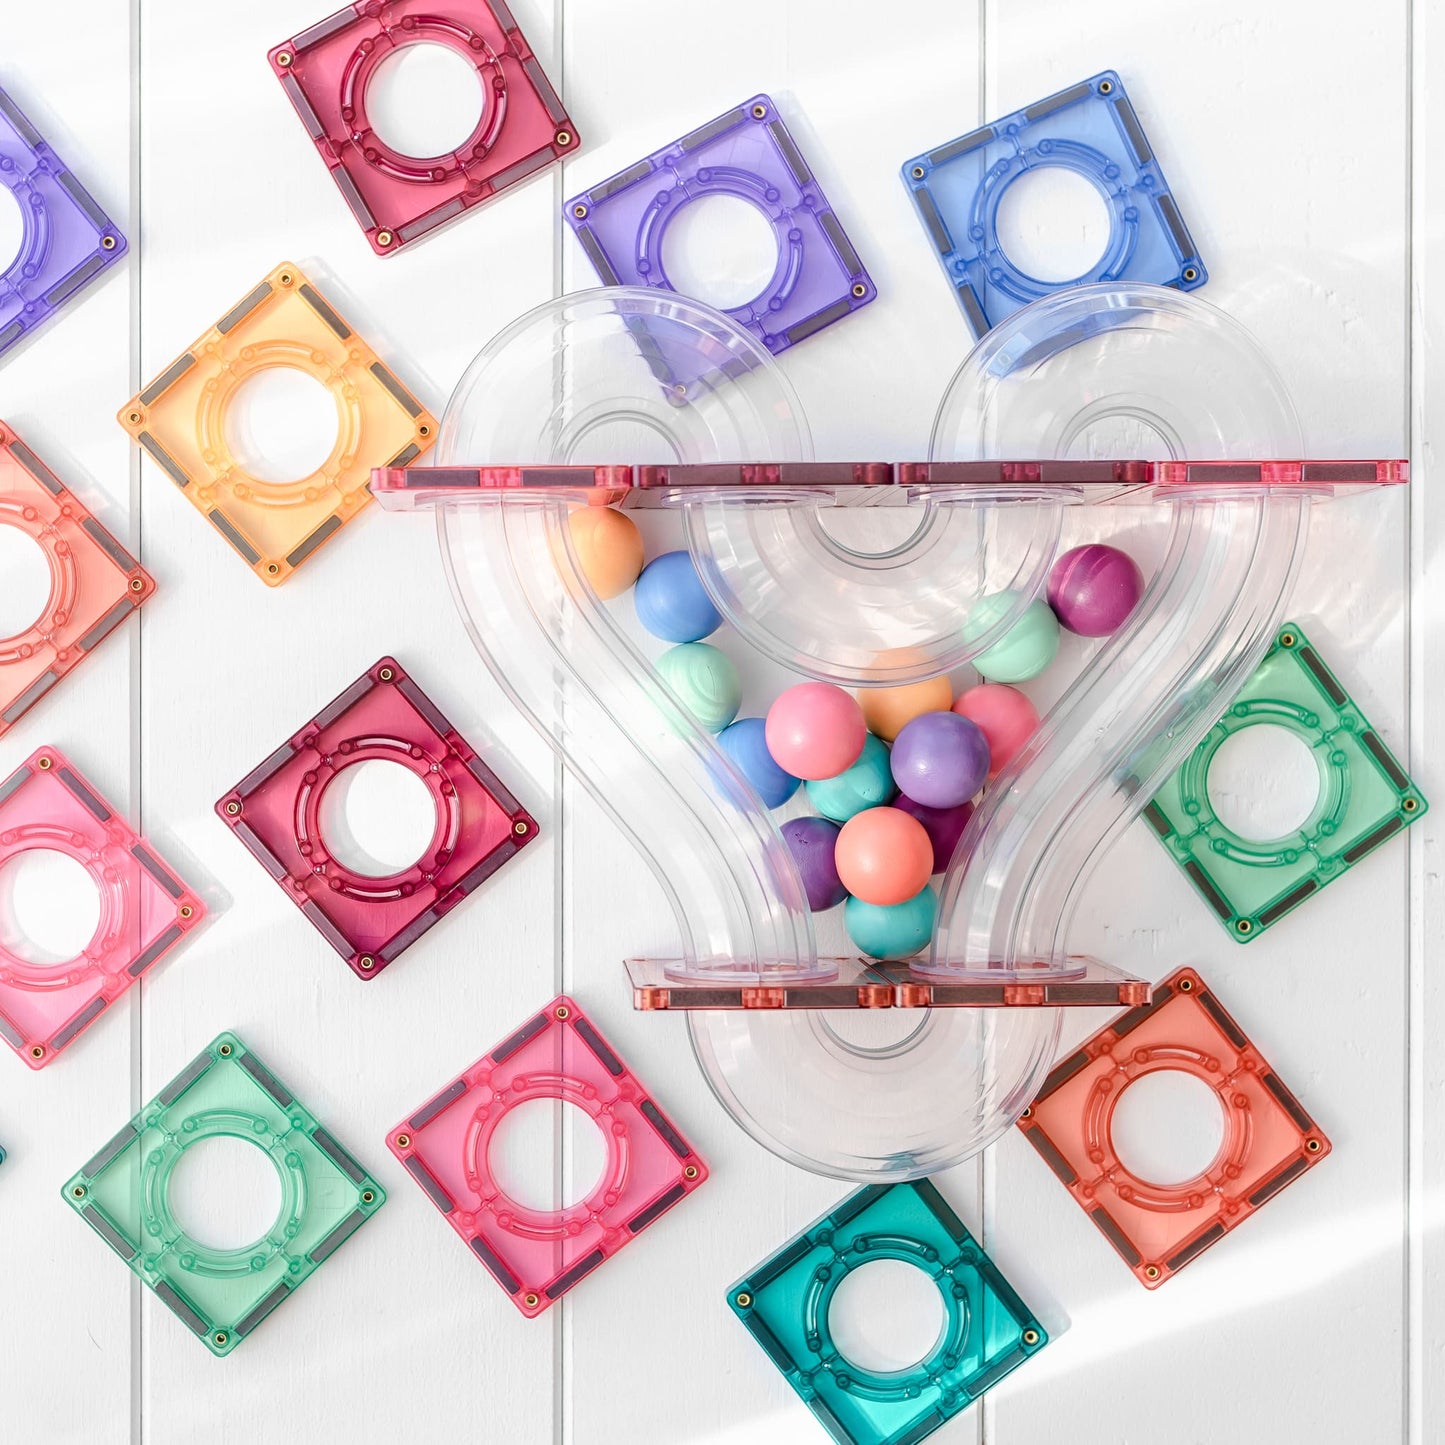 
                  
                    Pastel Connetix - 16pc Replacement Ball Pack
                  
                